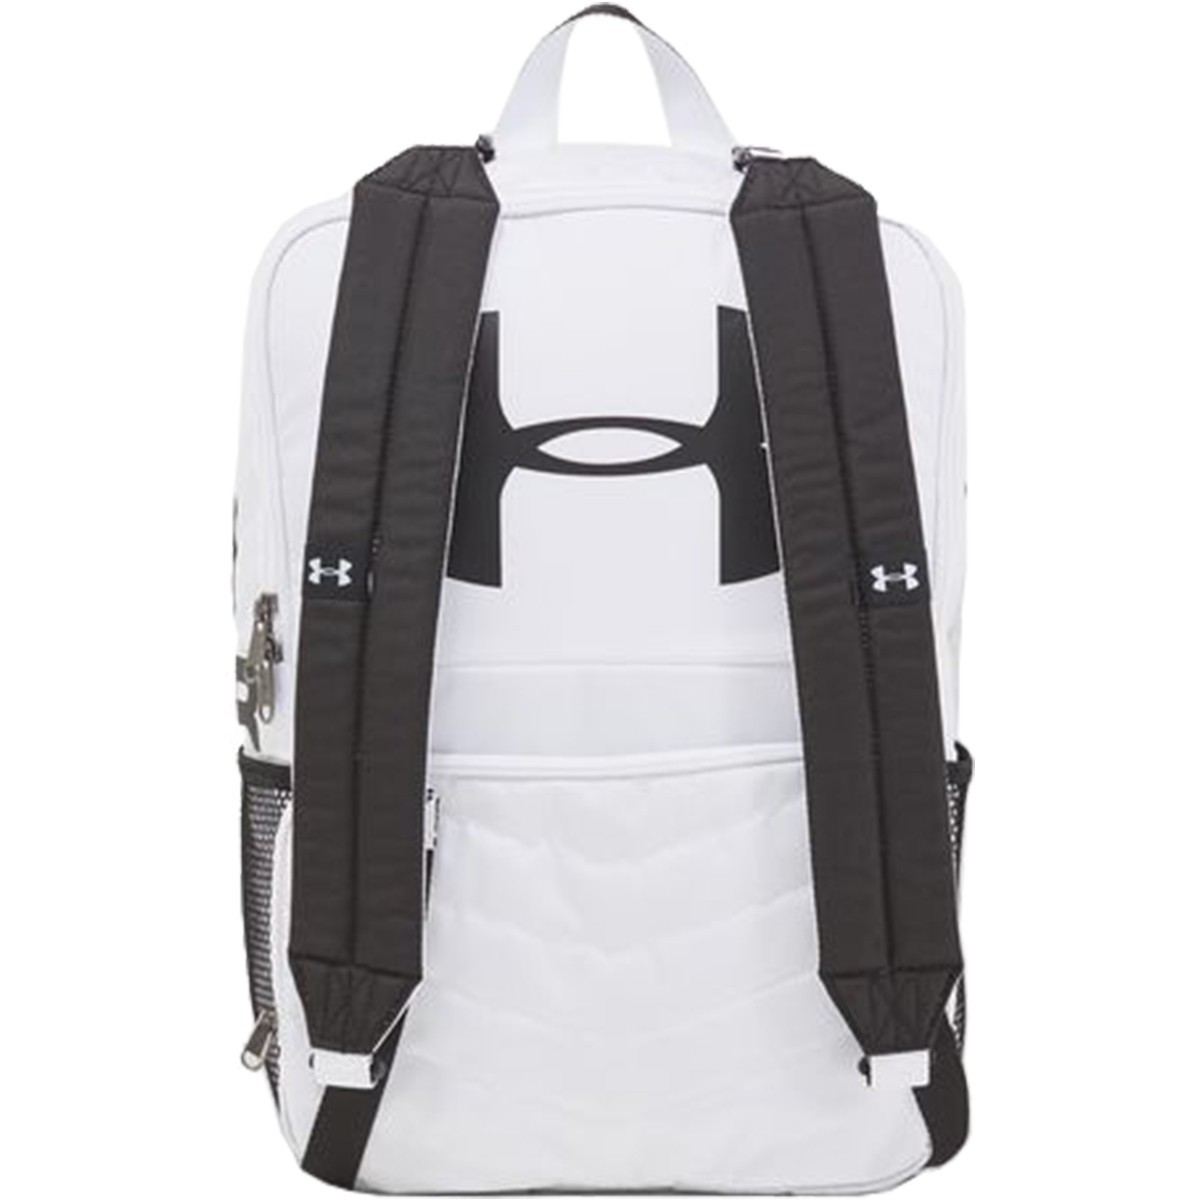 Under Armour Change-Up Backpack 